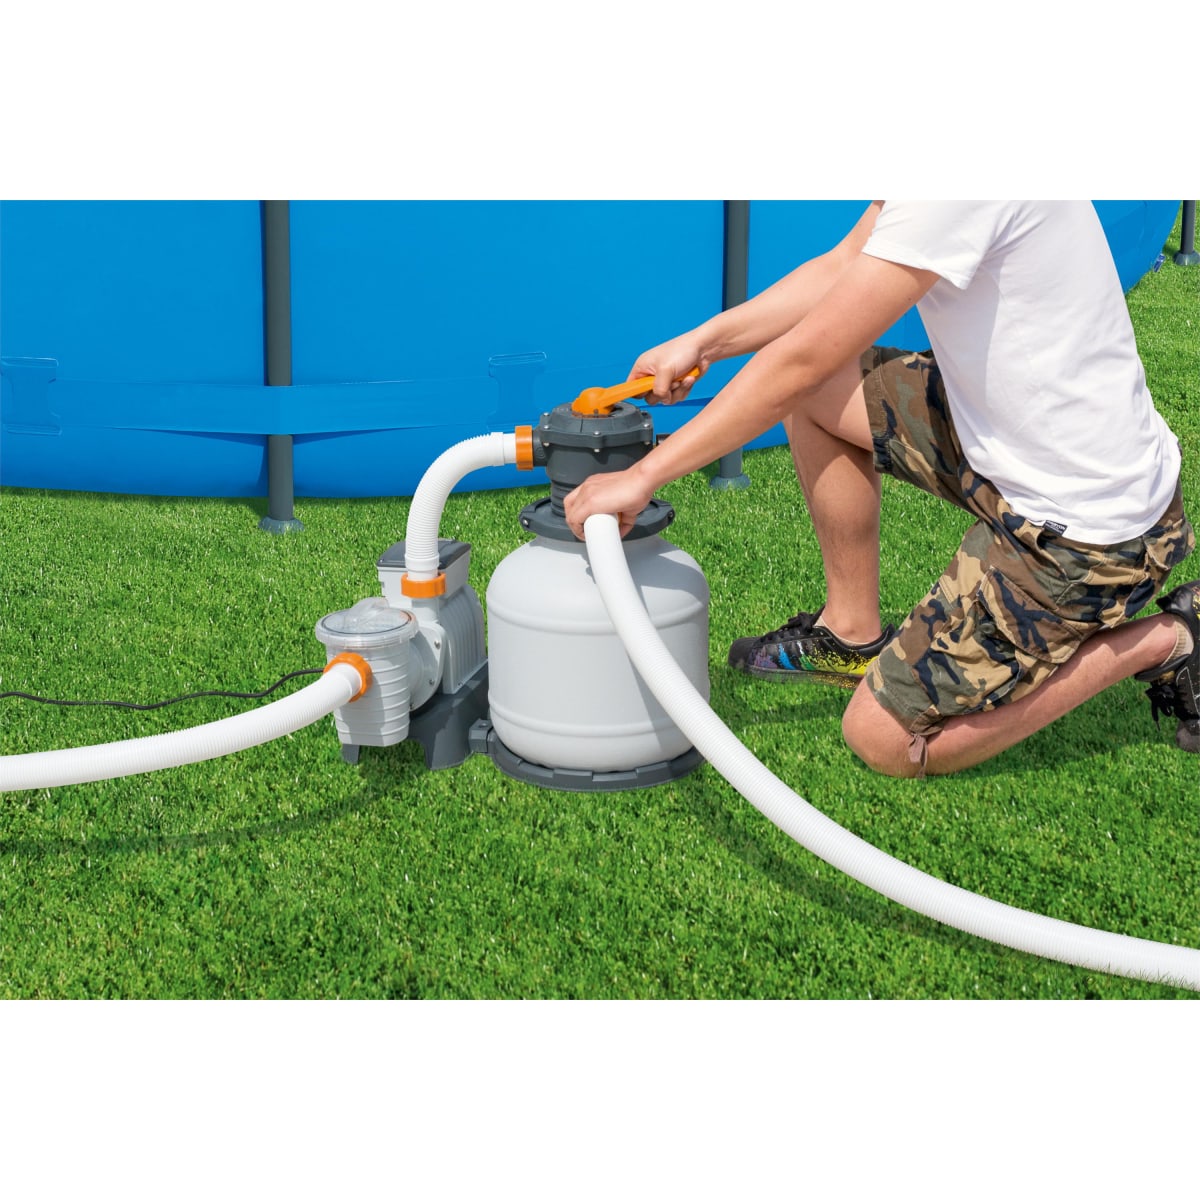 BESTWAY - Swimming pool Sand filter - 7571 lt/h - 280W - for pools that contain 40 to 54 cubic meters of water